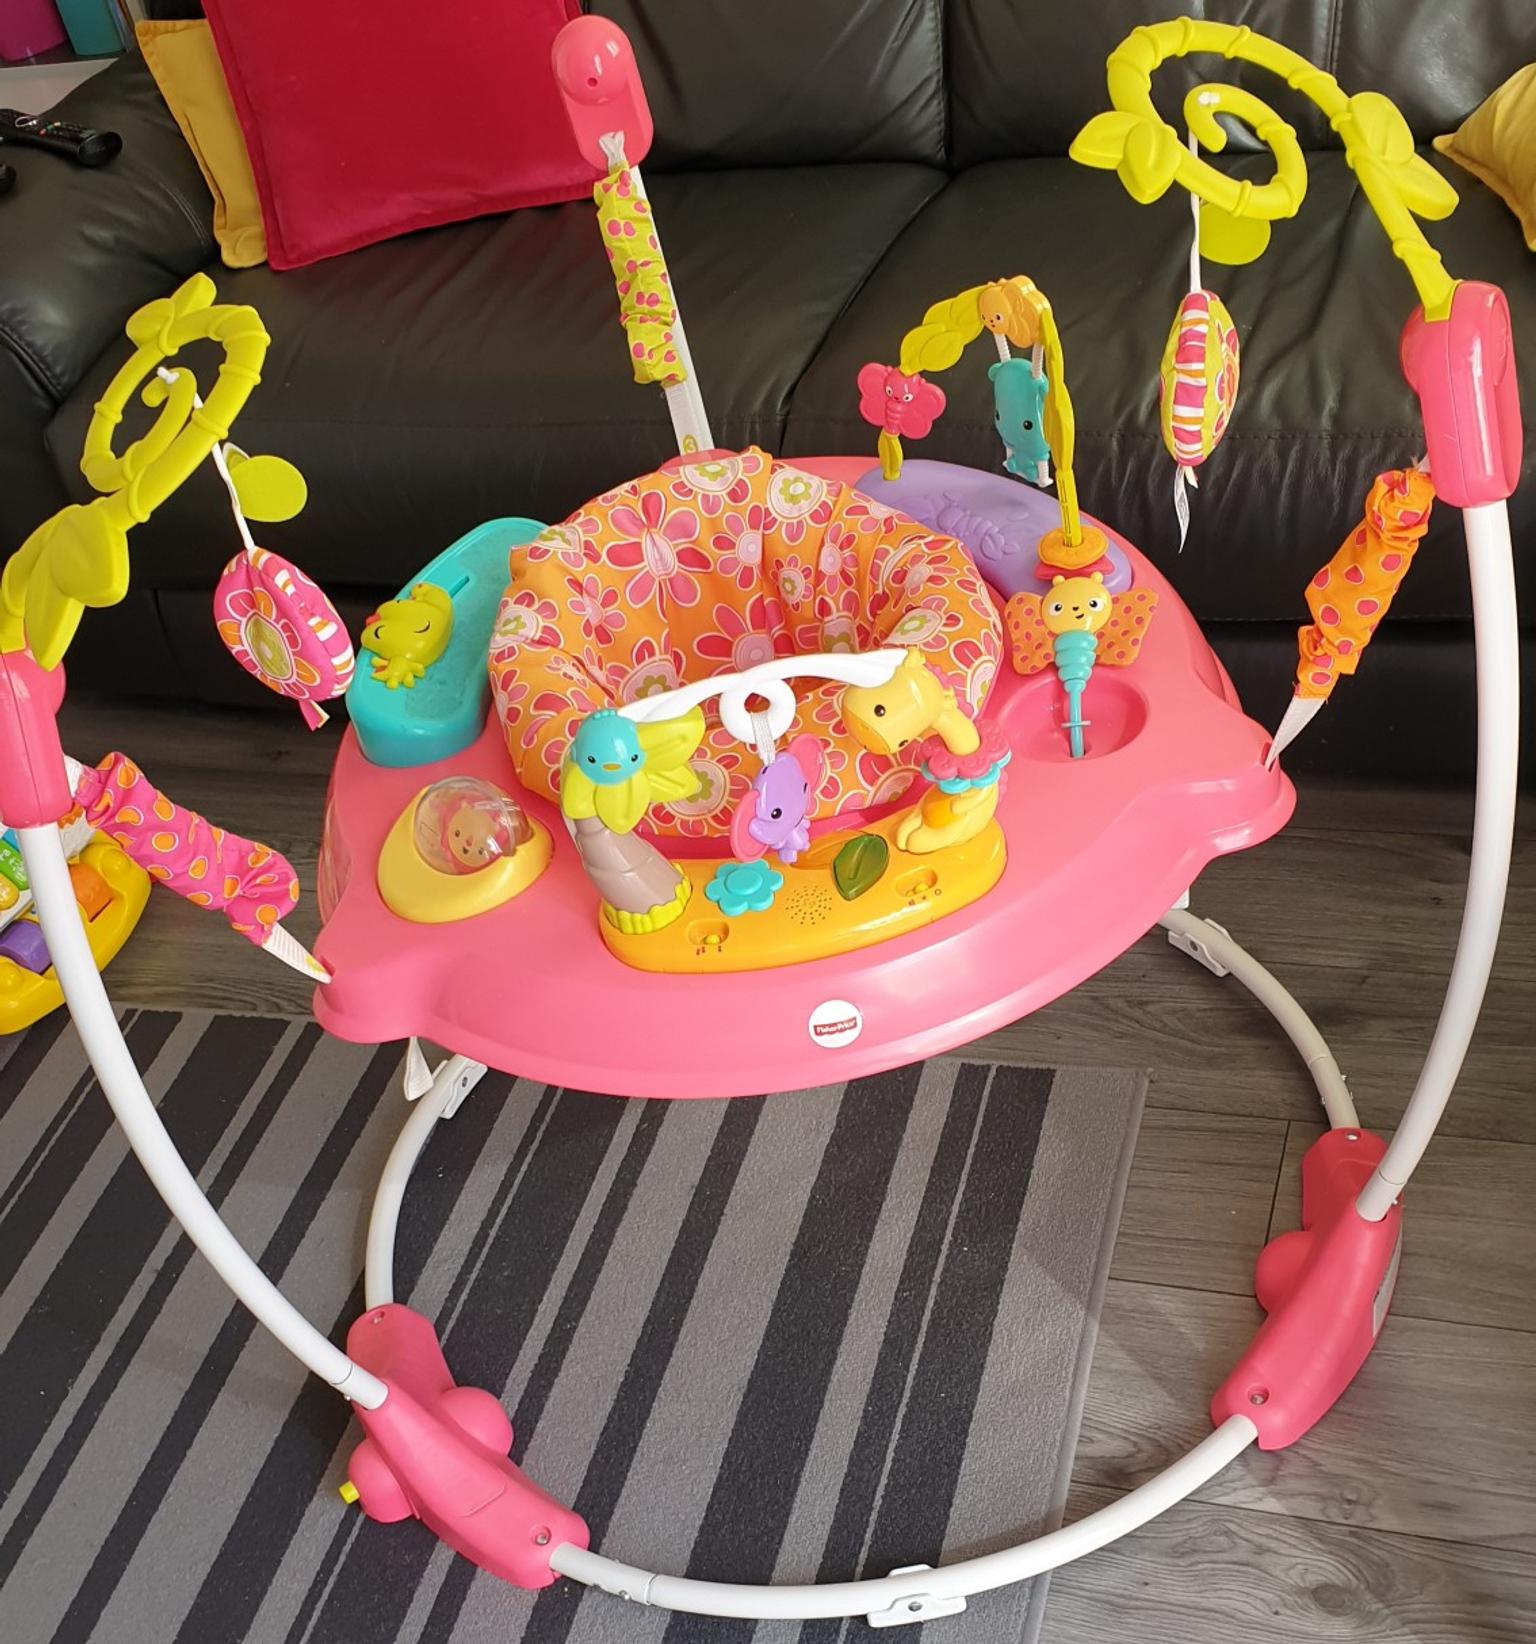 baby jumperoo pink